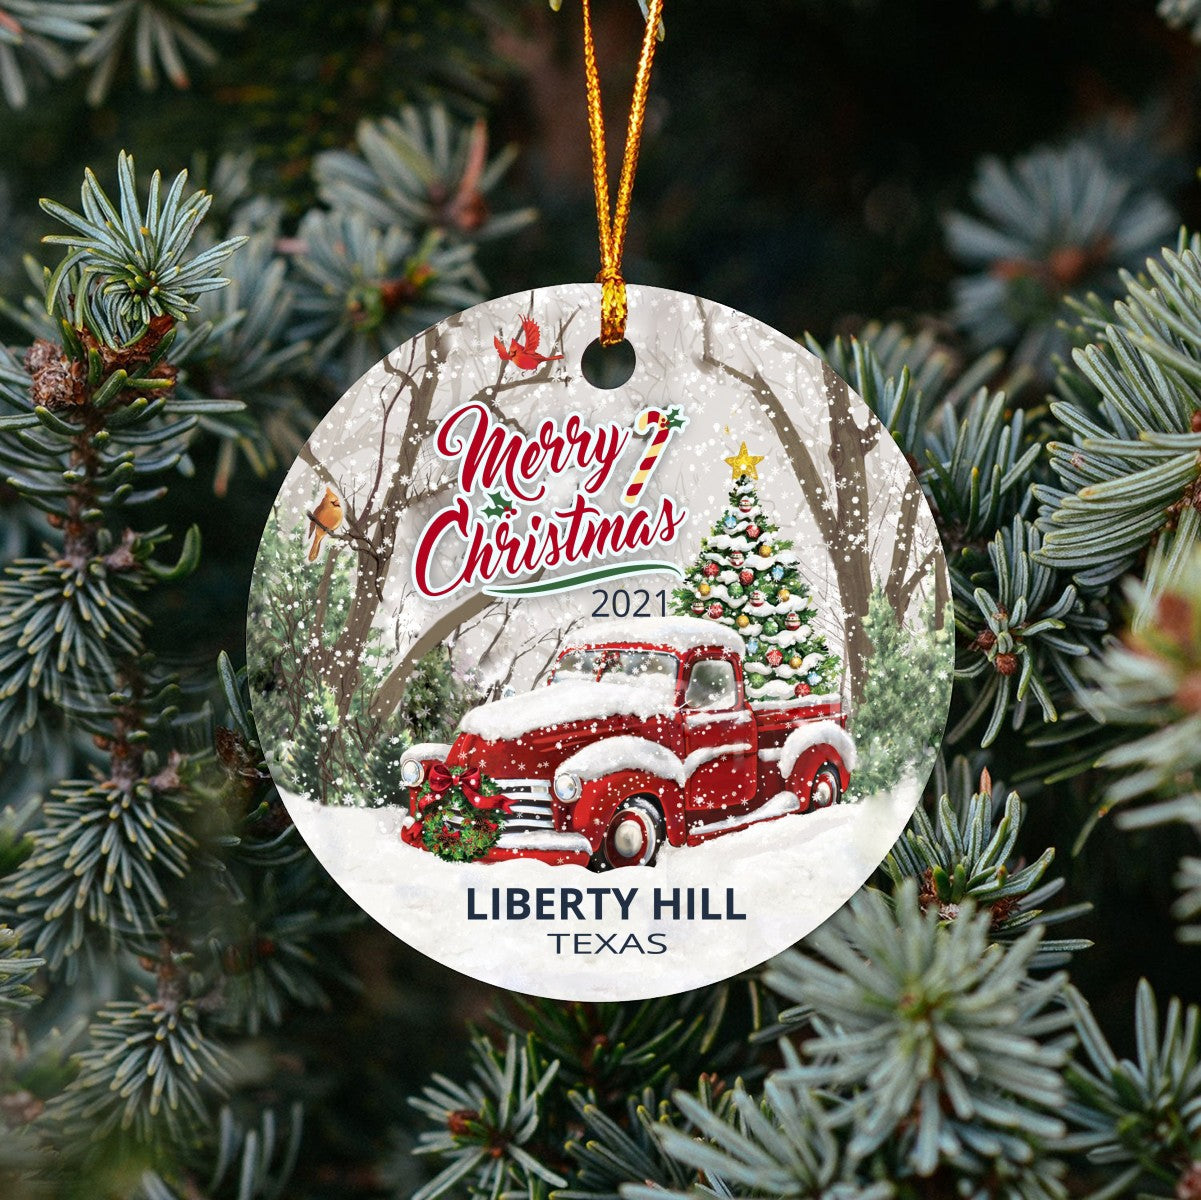 Christmas Tree Ornaments Liberty Hill - Ornament With Name City, State Liberty Hill Texas TX Ornament - Red Truck Xmas Ornaments 3'' Plastic Gift For Family, Friend And Housewarming